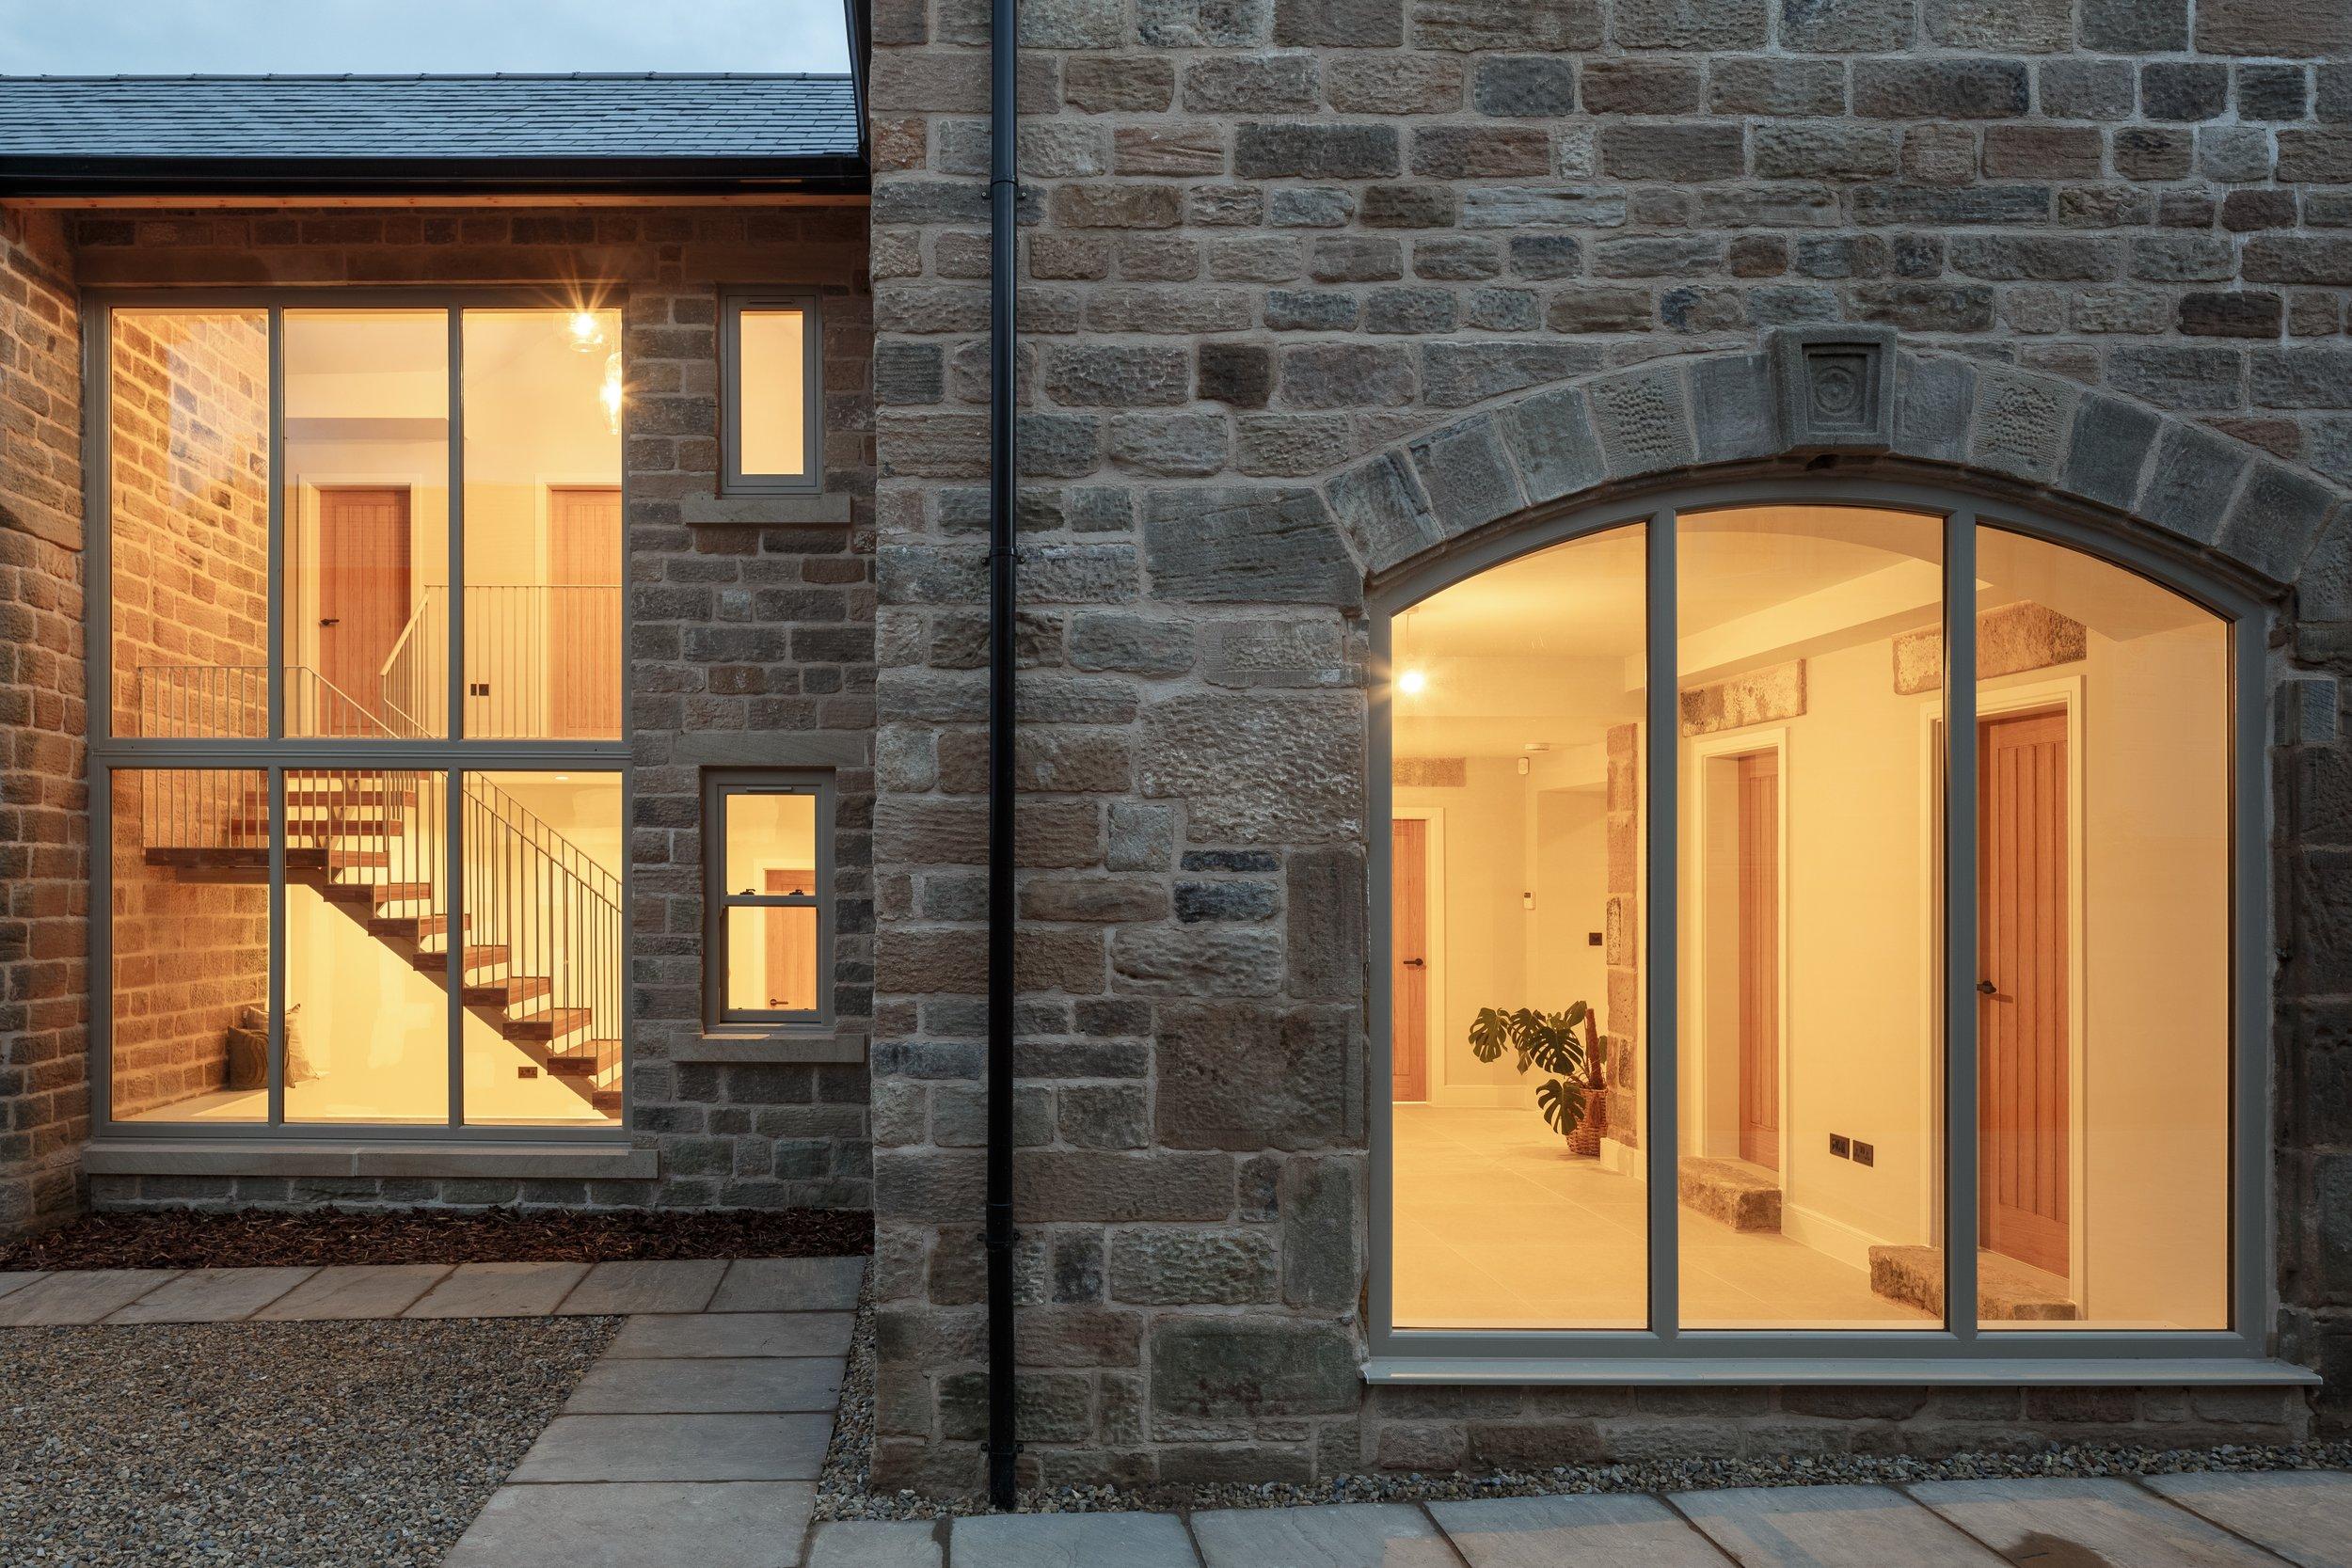 Images Dormer & Co. Chartered Architects